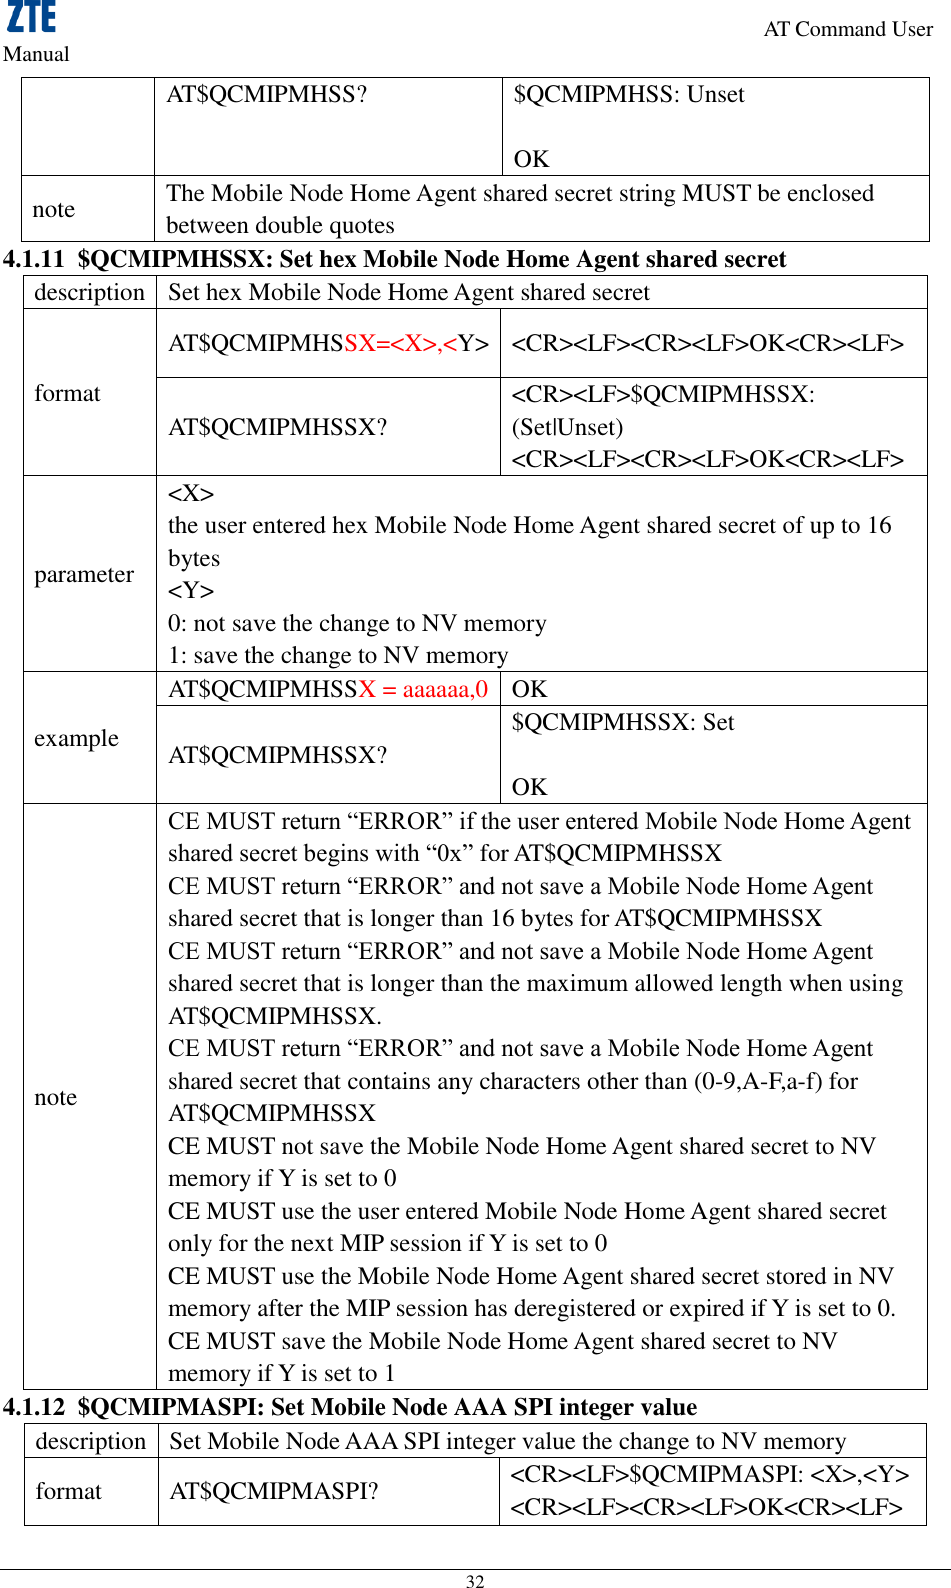                                                                     AT Command User Manual 32 AT$QCMIPMHSS? $QCMIPMHSS: Unset  OK note The Mobile Node Home Agent shared secret string MUST be enclosed between double quotes 4.1.11 $QCMIPMHSSX: Set hex Mobile Node Home Agent shared secret description Set hex Mobile Node Home Agent shared secret format AT$QCMIPMHSSX=&lt;X&gt;,&lt;Y&gt; &lt;CR&gt;&lt;LF&gt;&lt;CR&gt;&lt;LF&gt;OK&lt;CR&gt;&lt;LF&gt; AT$QCMIPMHSSX? &lt;CR&gt;&lt;LF&gt;$QCMIPMHSSX: (Set|Unset) &lt;CR&gt;&lt;LF&gt;&lt;CR&gt;&lt;LF&gt;OK&lt;CR&gt;&lt;LF&gt; parameter &lt;X&gt; the user entered hex Mobile Node Home Agent shared secret of up to 16 bytes   &lt;Y&gt; 0: not save the change to NV memory 1: save the change to NV memory example AT$QCMIPMHSSX = aaaaaa,0 OK AT$QCMIPMHSSX? $QCMIPMHSSX: Set    OK note CE MUST return “ERROR” if the user entered Mobile Node Home Agent shared secret begins with “0x” for AT$QCMIPMHSSX   CE MUST return “ERROR” and not save a Mobile Node Home Agent shared secret that is longer than 16 bytes for AT$QCMIPMHSSX CE MUST return “ERROR” and not save a Mobile Node Home Agent shared secret that is longer than the maximum allowed length when using AT$QCMIPMHSSX.   CE MUST return “ERROR” and not save a Mobile Node Home Agent shared secret that contains any characters other than (0-9,A-F,a-f) for AT$QCMIPMHSSX   CE MUST not save the Mobile Node Home Agent shared secret to NV memory if Y is set to 0   CE MUST use the user entered Mobile Node Home Agent shared secret only for the next MIP session if Y is set to 0 CE MUST use the Mobile Node Home Agent shared secret stored in NV memory after the MIP session has deregistered or expired if Y is set to 0.   CE MUST save the Mobile Node Home Agent shared secret to NV memory if Y is set to 1 4.1.12 $QCMIPMASPI: Set Mobile Node AAA SPI integer value   description Set Mobile Node AAA SPI integer value the change to NV memory format AT$QCMIPMASPI? &lt;CR&gt;&lt;LF&gt;$QCMIPMASPI: &lt;X&gt;,&lt;Y&gt; &lt;CR&gt;&lt;LF&gt;&lt;CR&gt;&lt;LF&gt;OK&lt;CR&gt;&lt;LF&gt; 